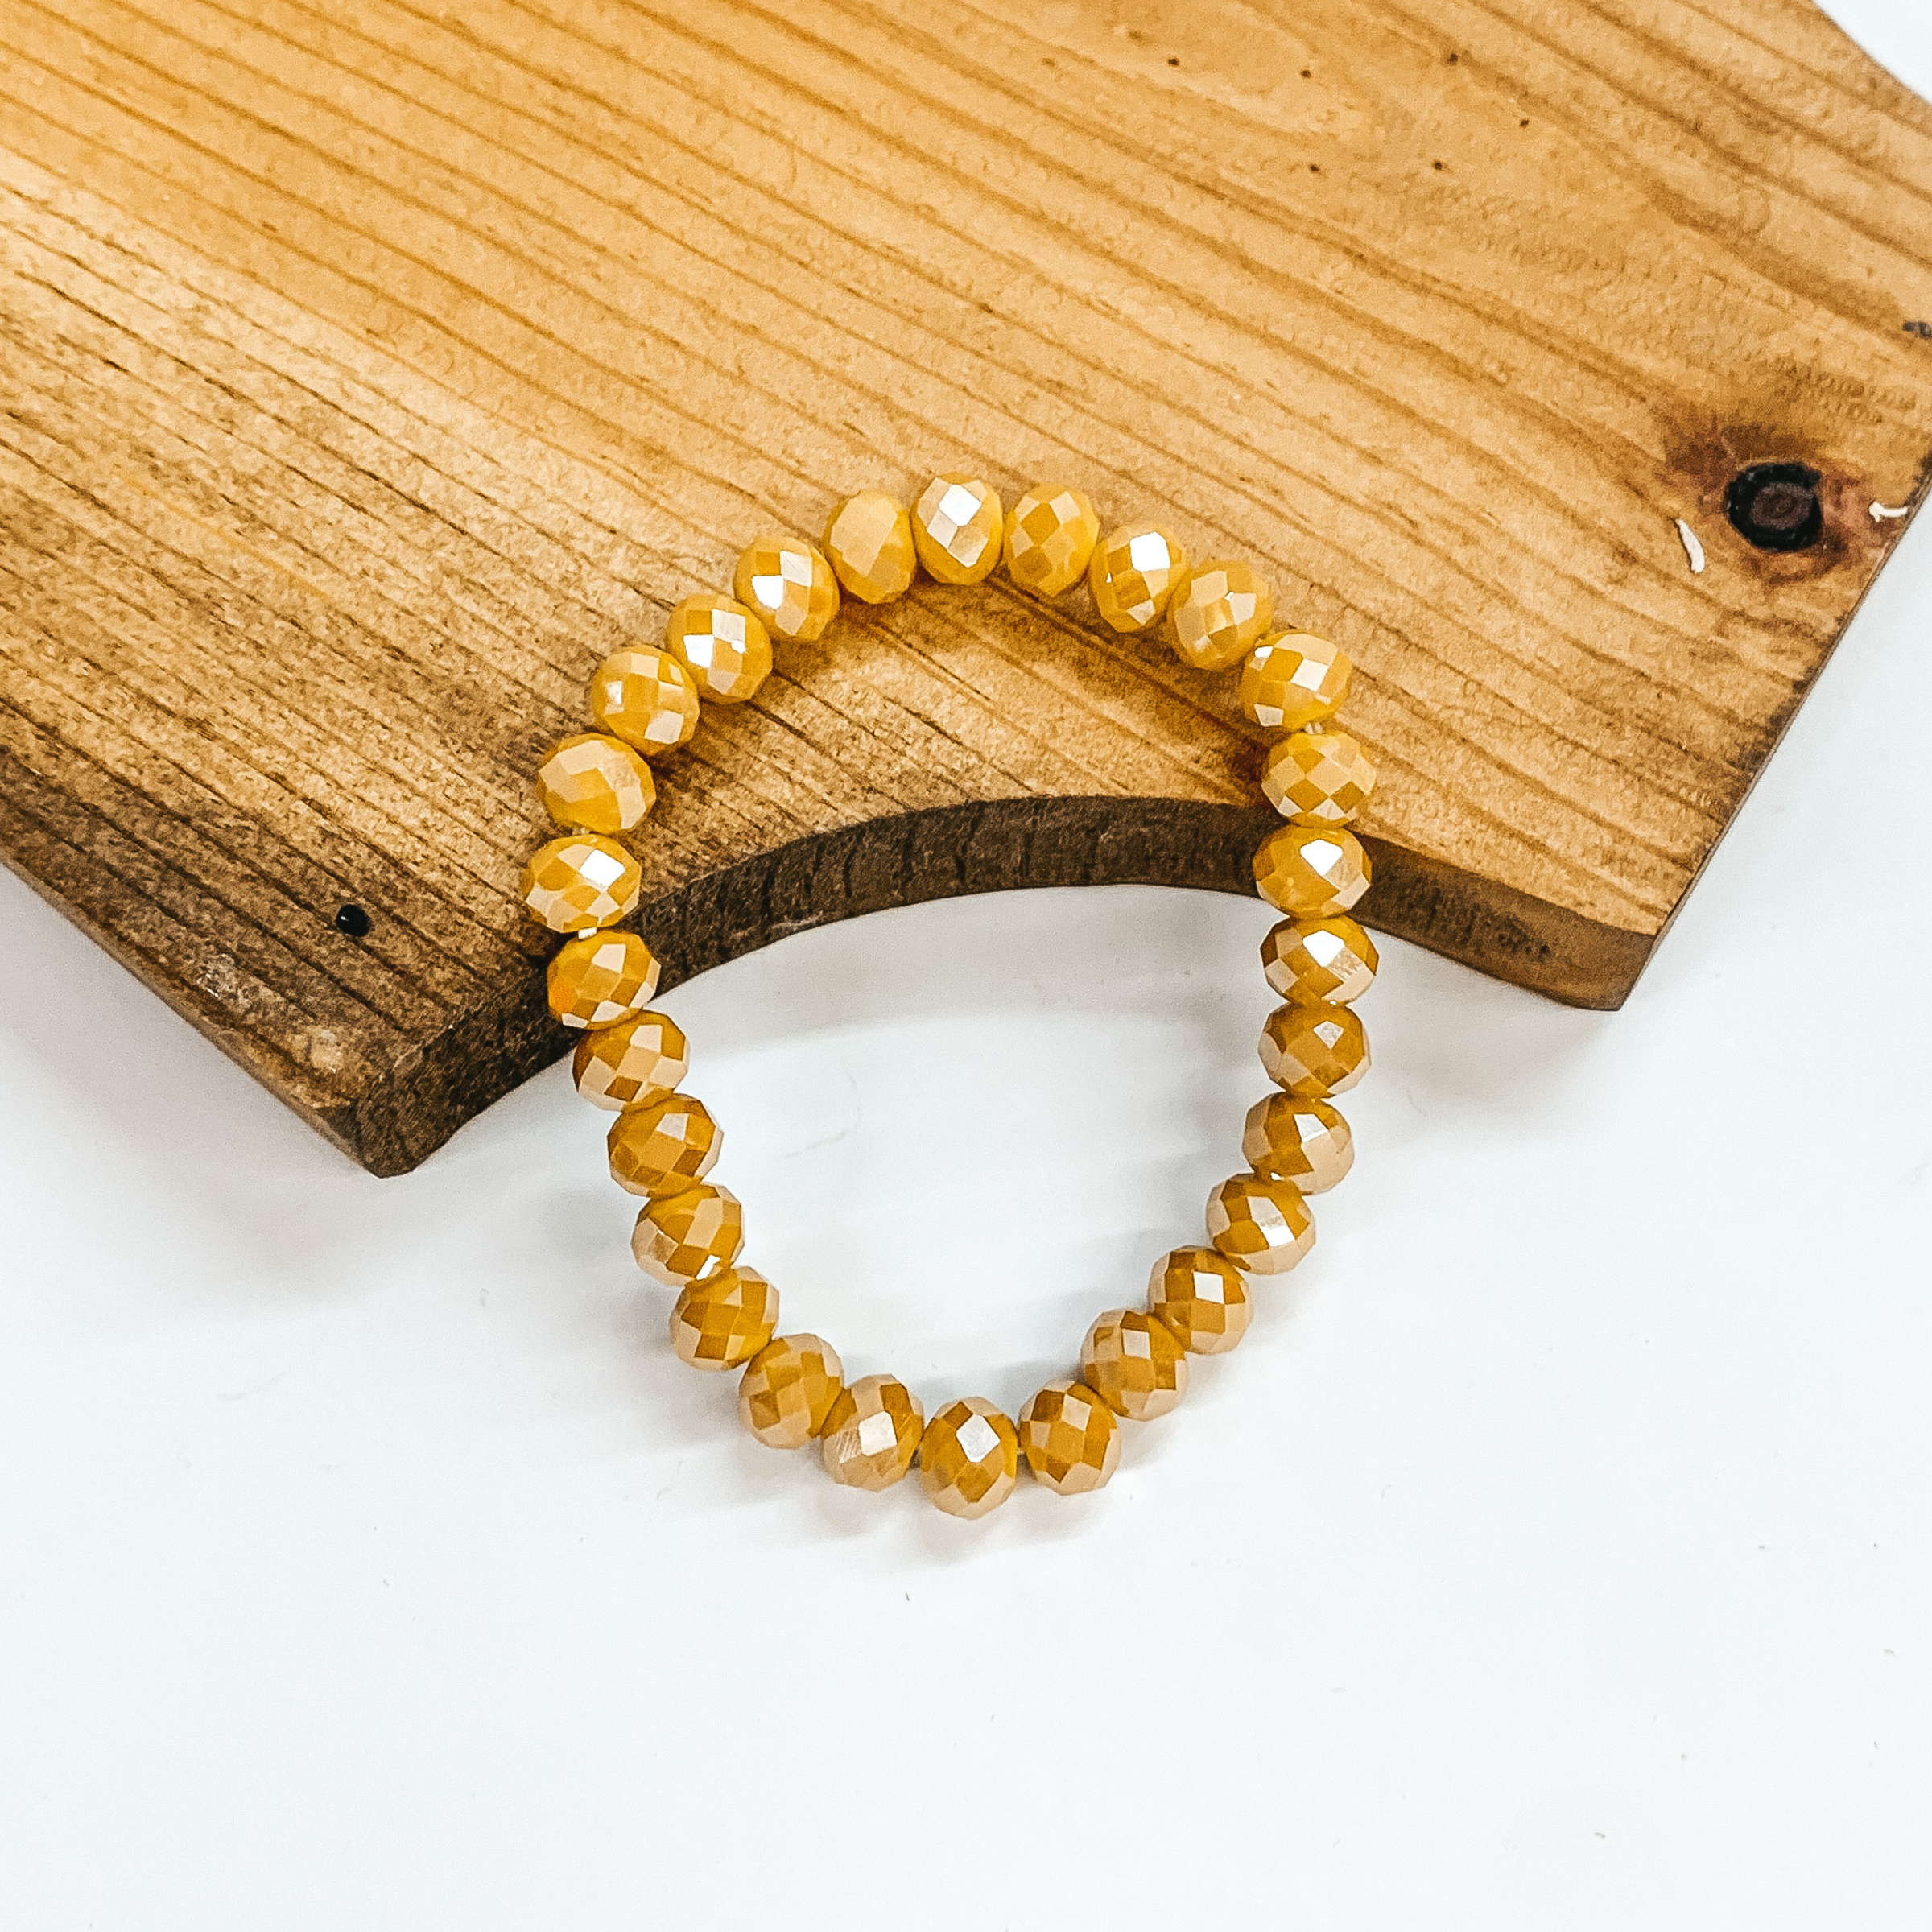 Buy 3 for $10 | Crystal Beaded Stacker Bracelet in Golden Yellow - Giddy Up Glamour Boutique